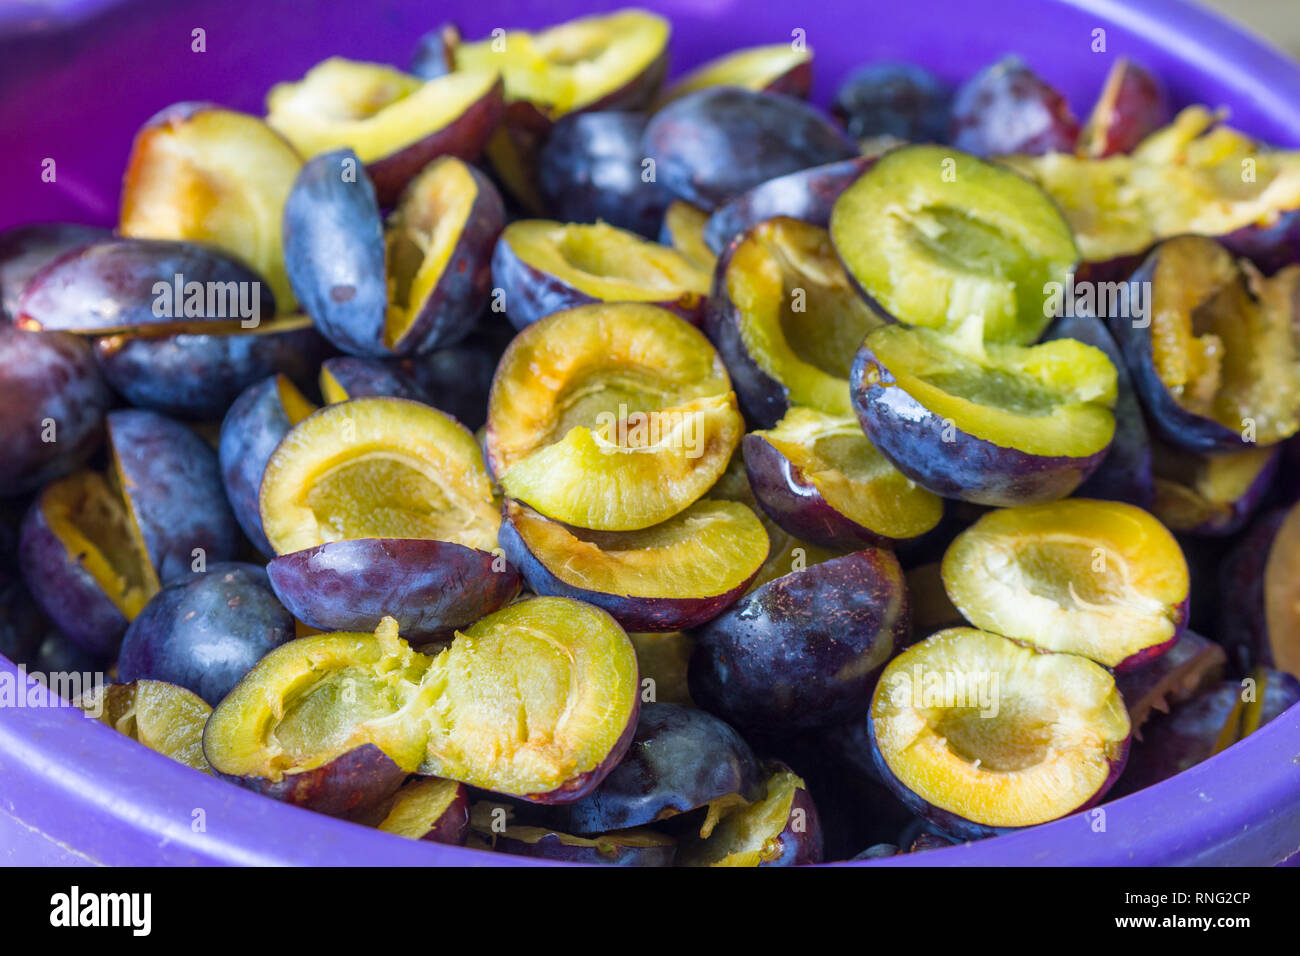 Plums cut in half prepared to be sun dried in a village in the Eastern part of the Balkan Mountains in Serbia. Stock Photo